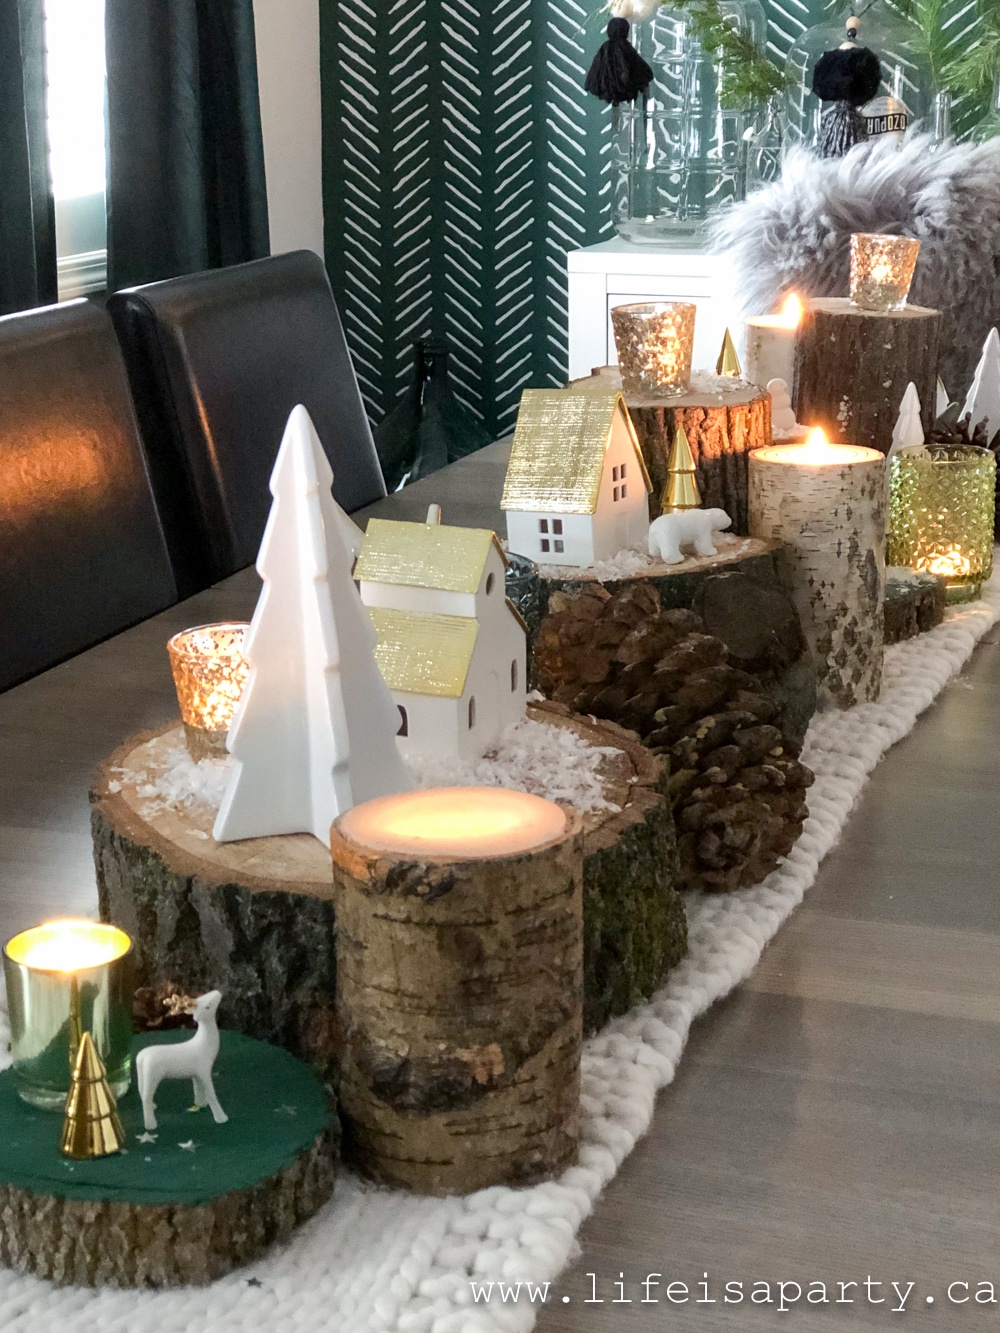 Christmas centre piece with rustic materials and green Christmas decor.